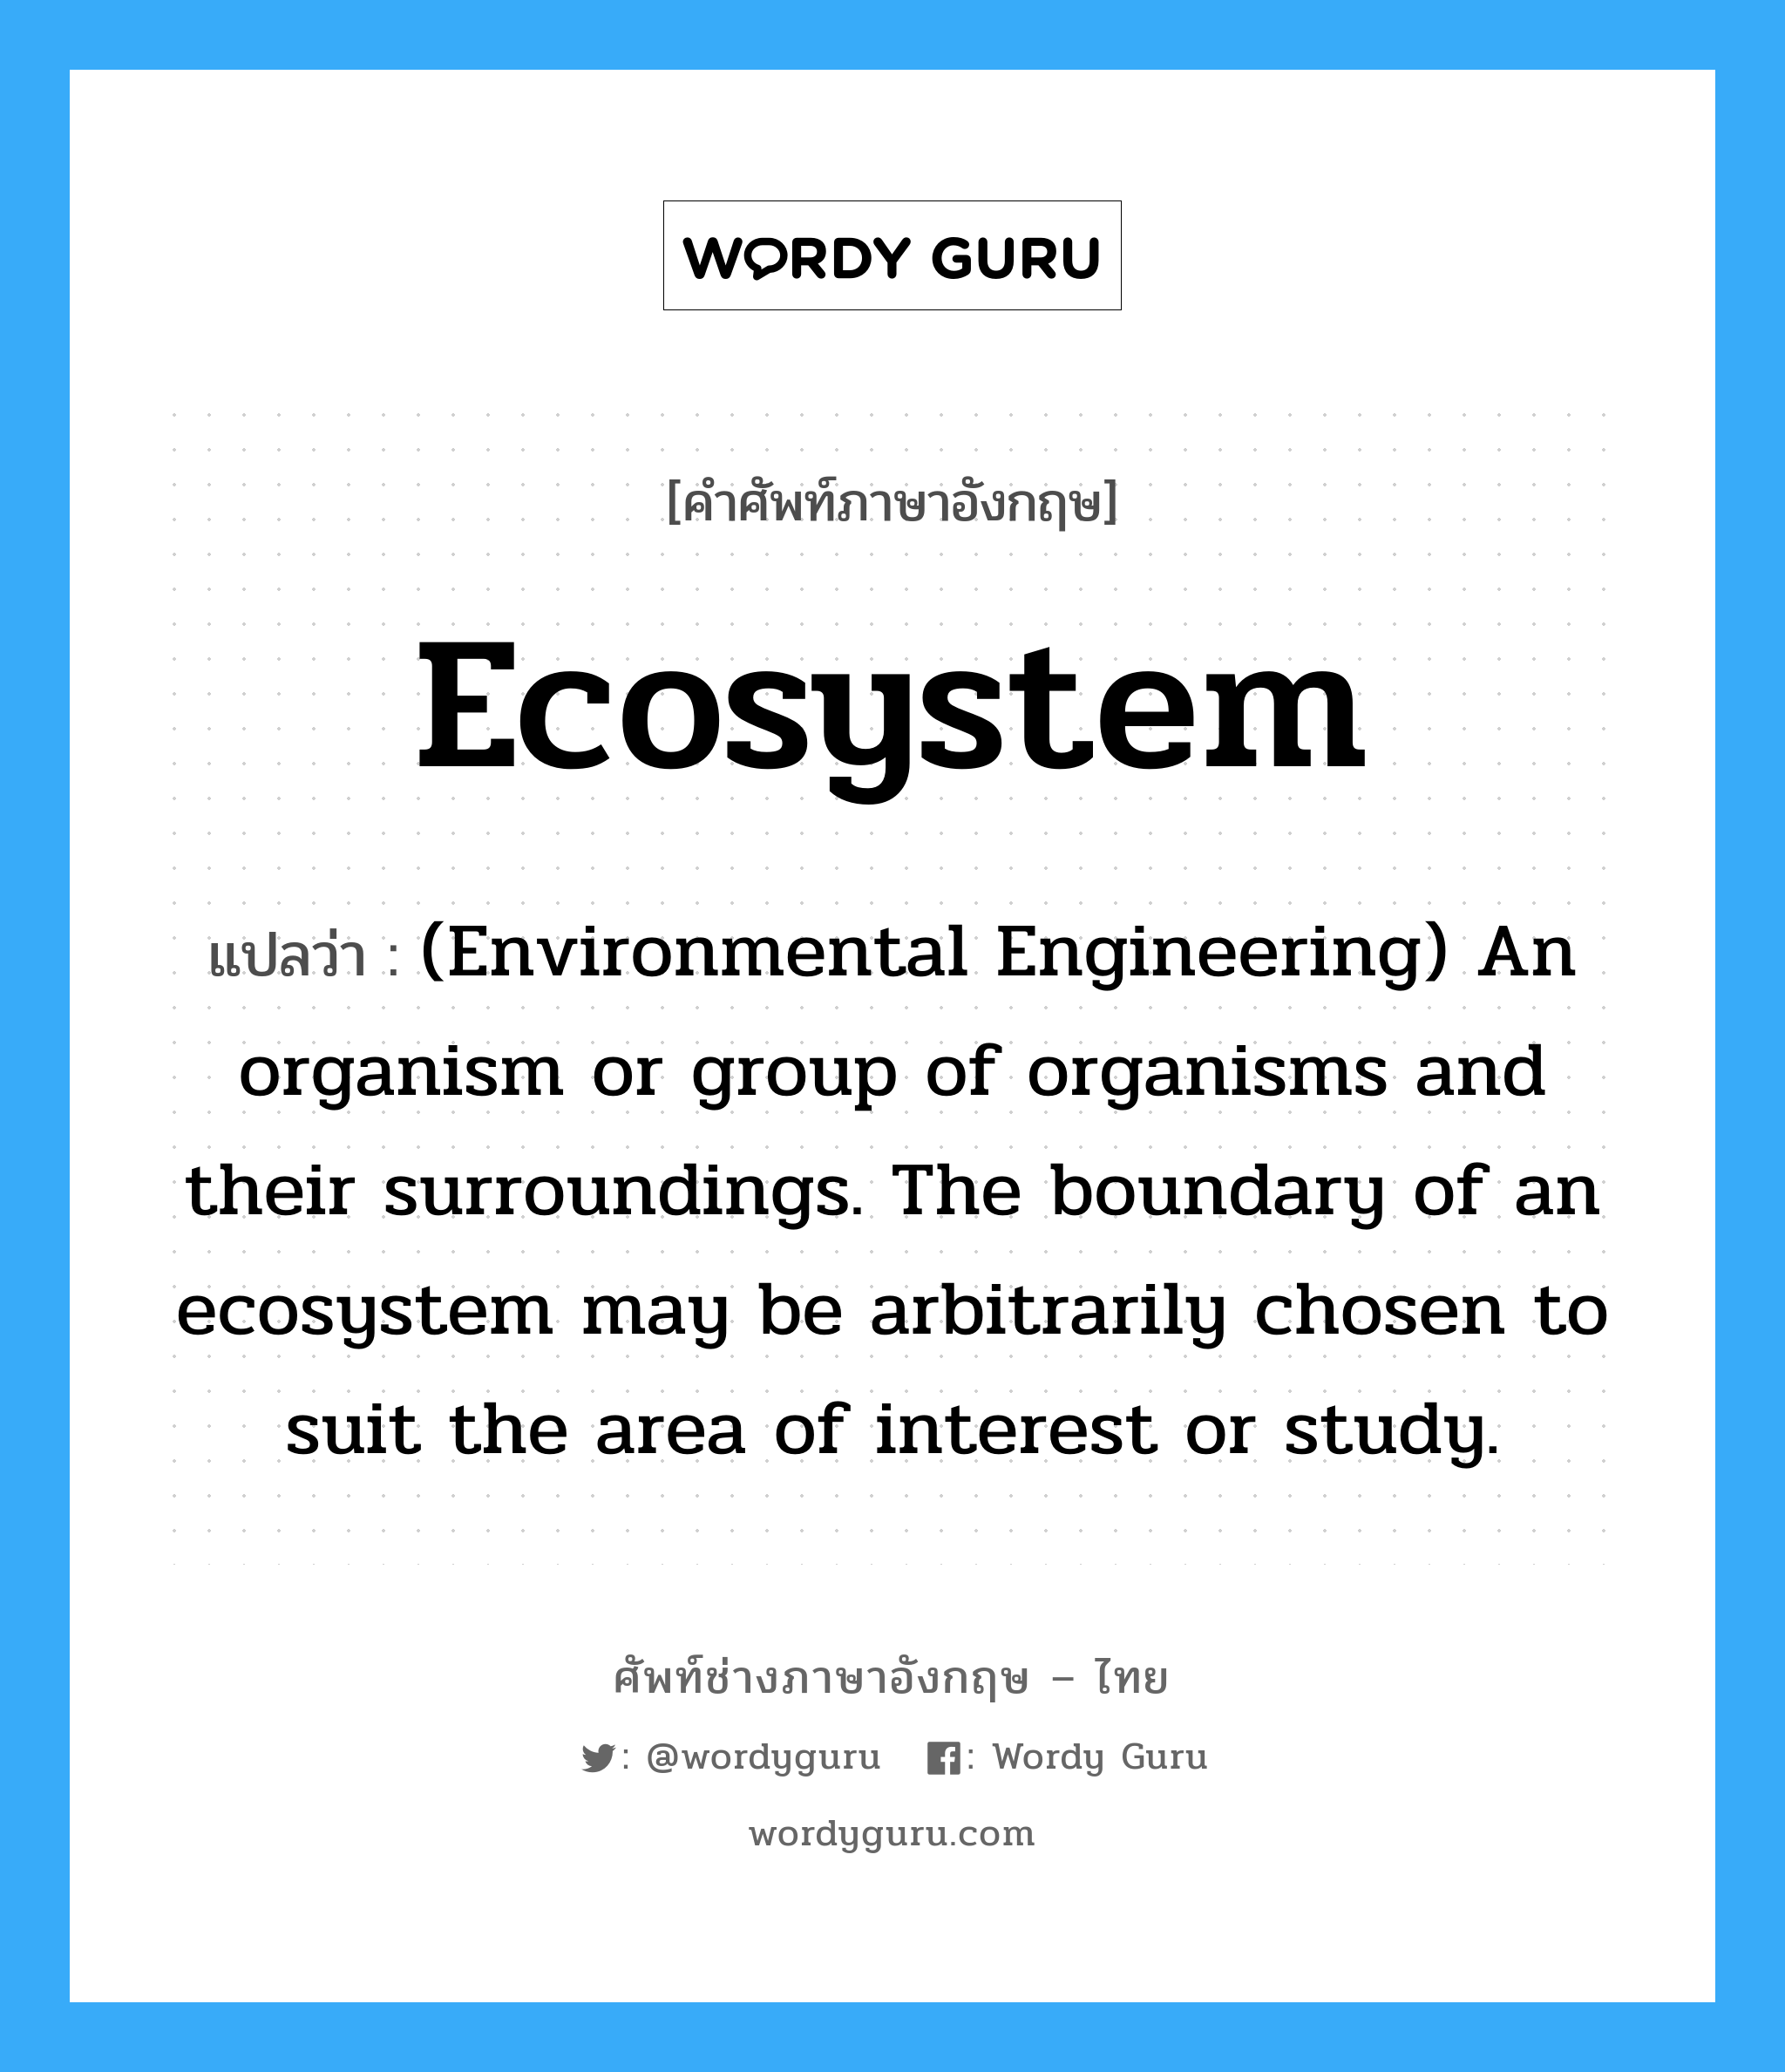 Ecosystem แปลว่า?, คำศัพท์ช่างภาษาอังกฤษ - ไทย Ecosystem คำศัพท์ภาษาอังกฤษ Ecosystem แปลว่า (Environmental Engineering) An organism or group of organisms and their surroundings. The boundary of an ecosystem may be arbitrarily chosen to suit the area of interest or study.